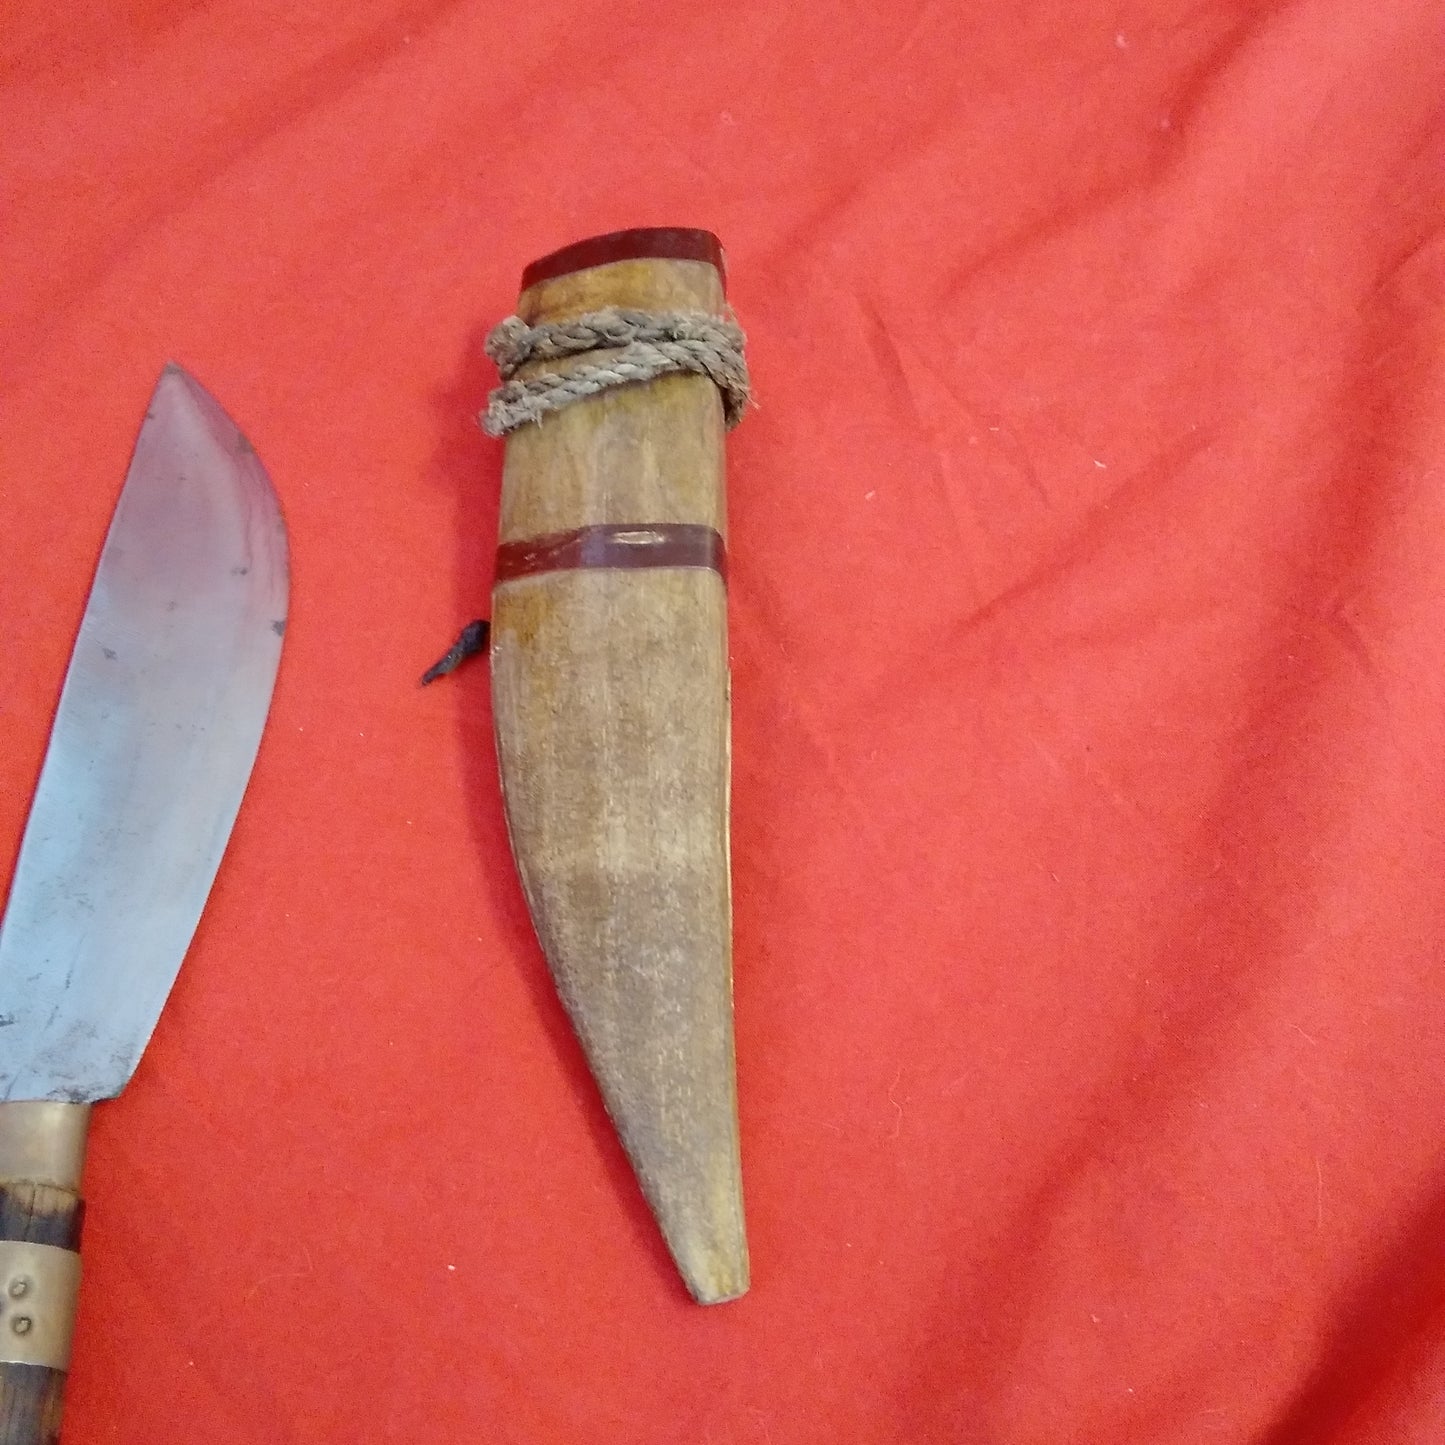 Vintage Handmade 10" Hunting Knife with Wood Scabbard